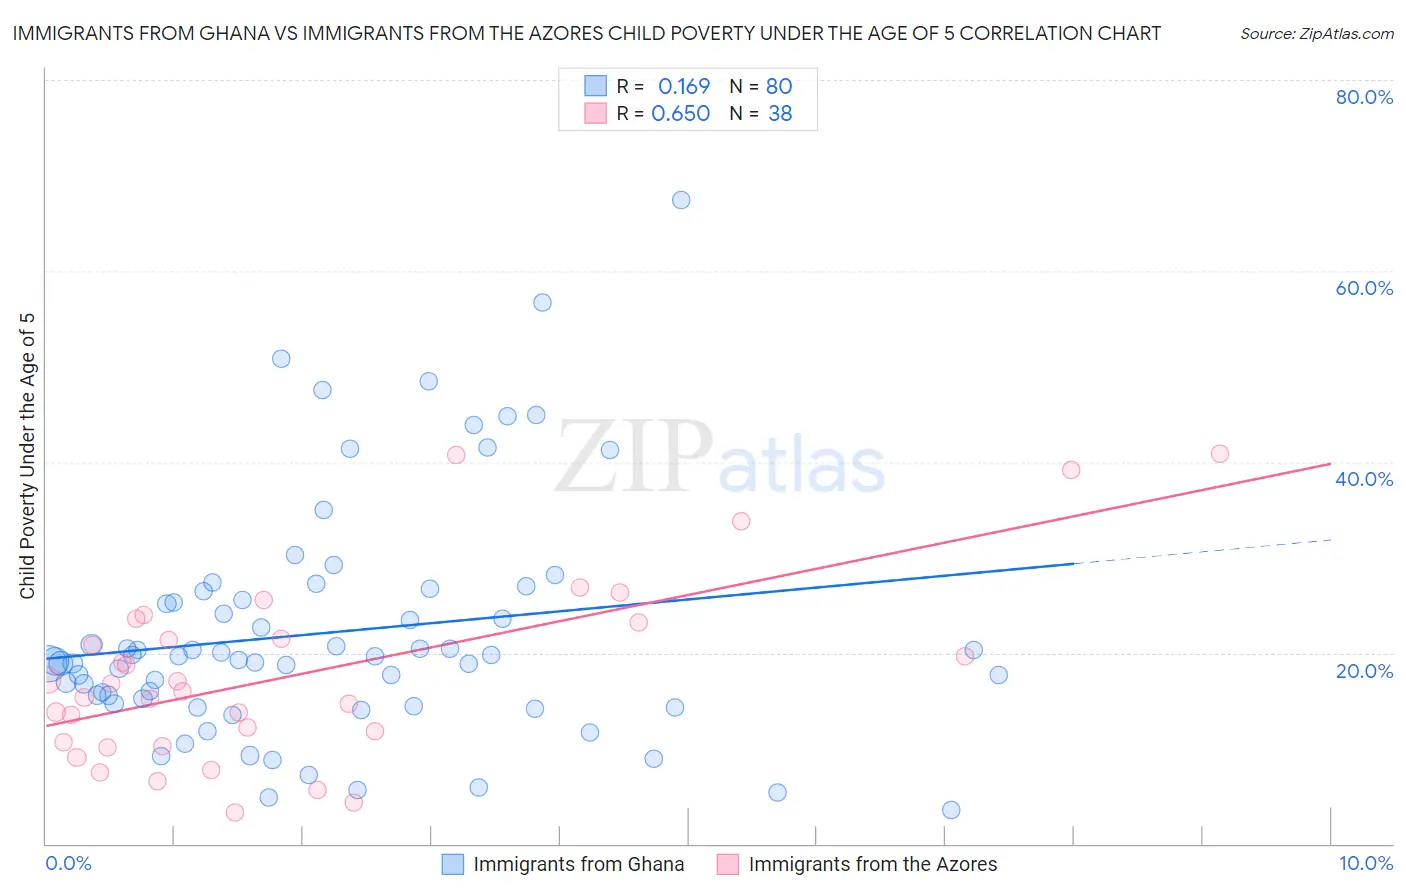 Immigrants from Ghana vs Immigrants from the Azores Child Poverty Under the Age of 5